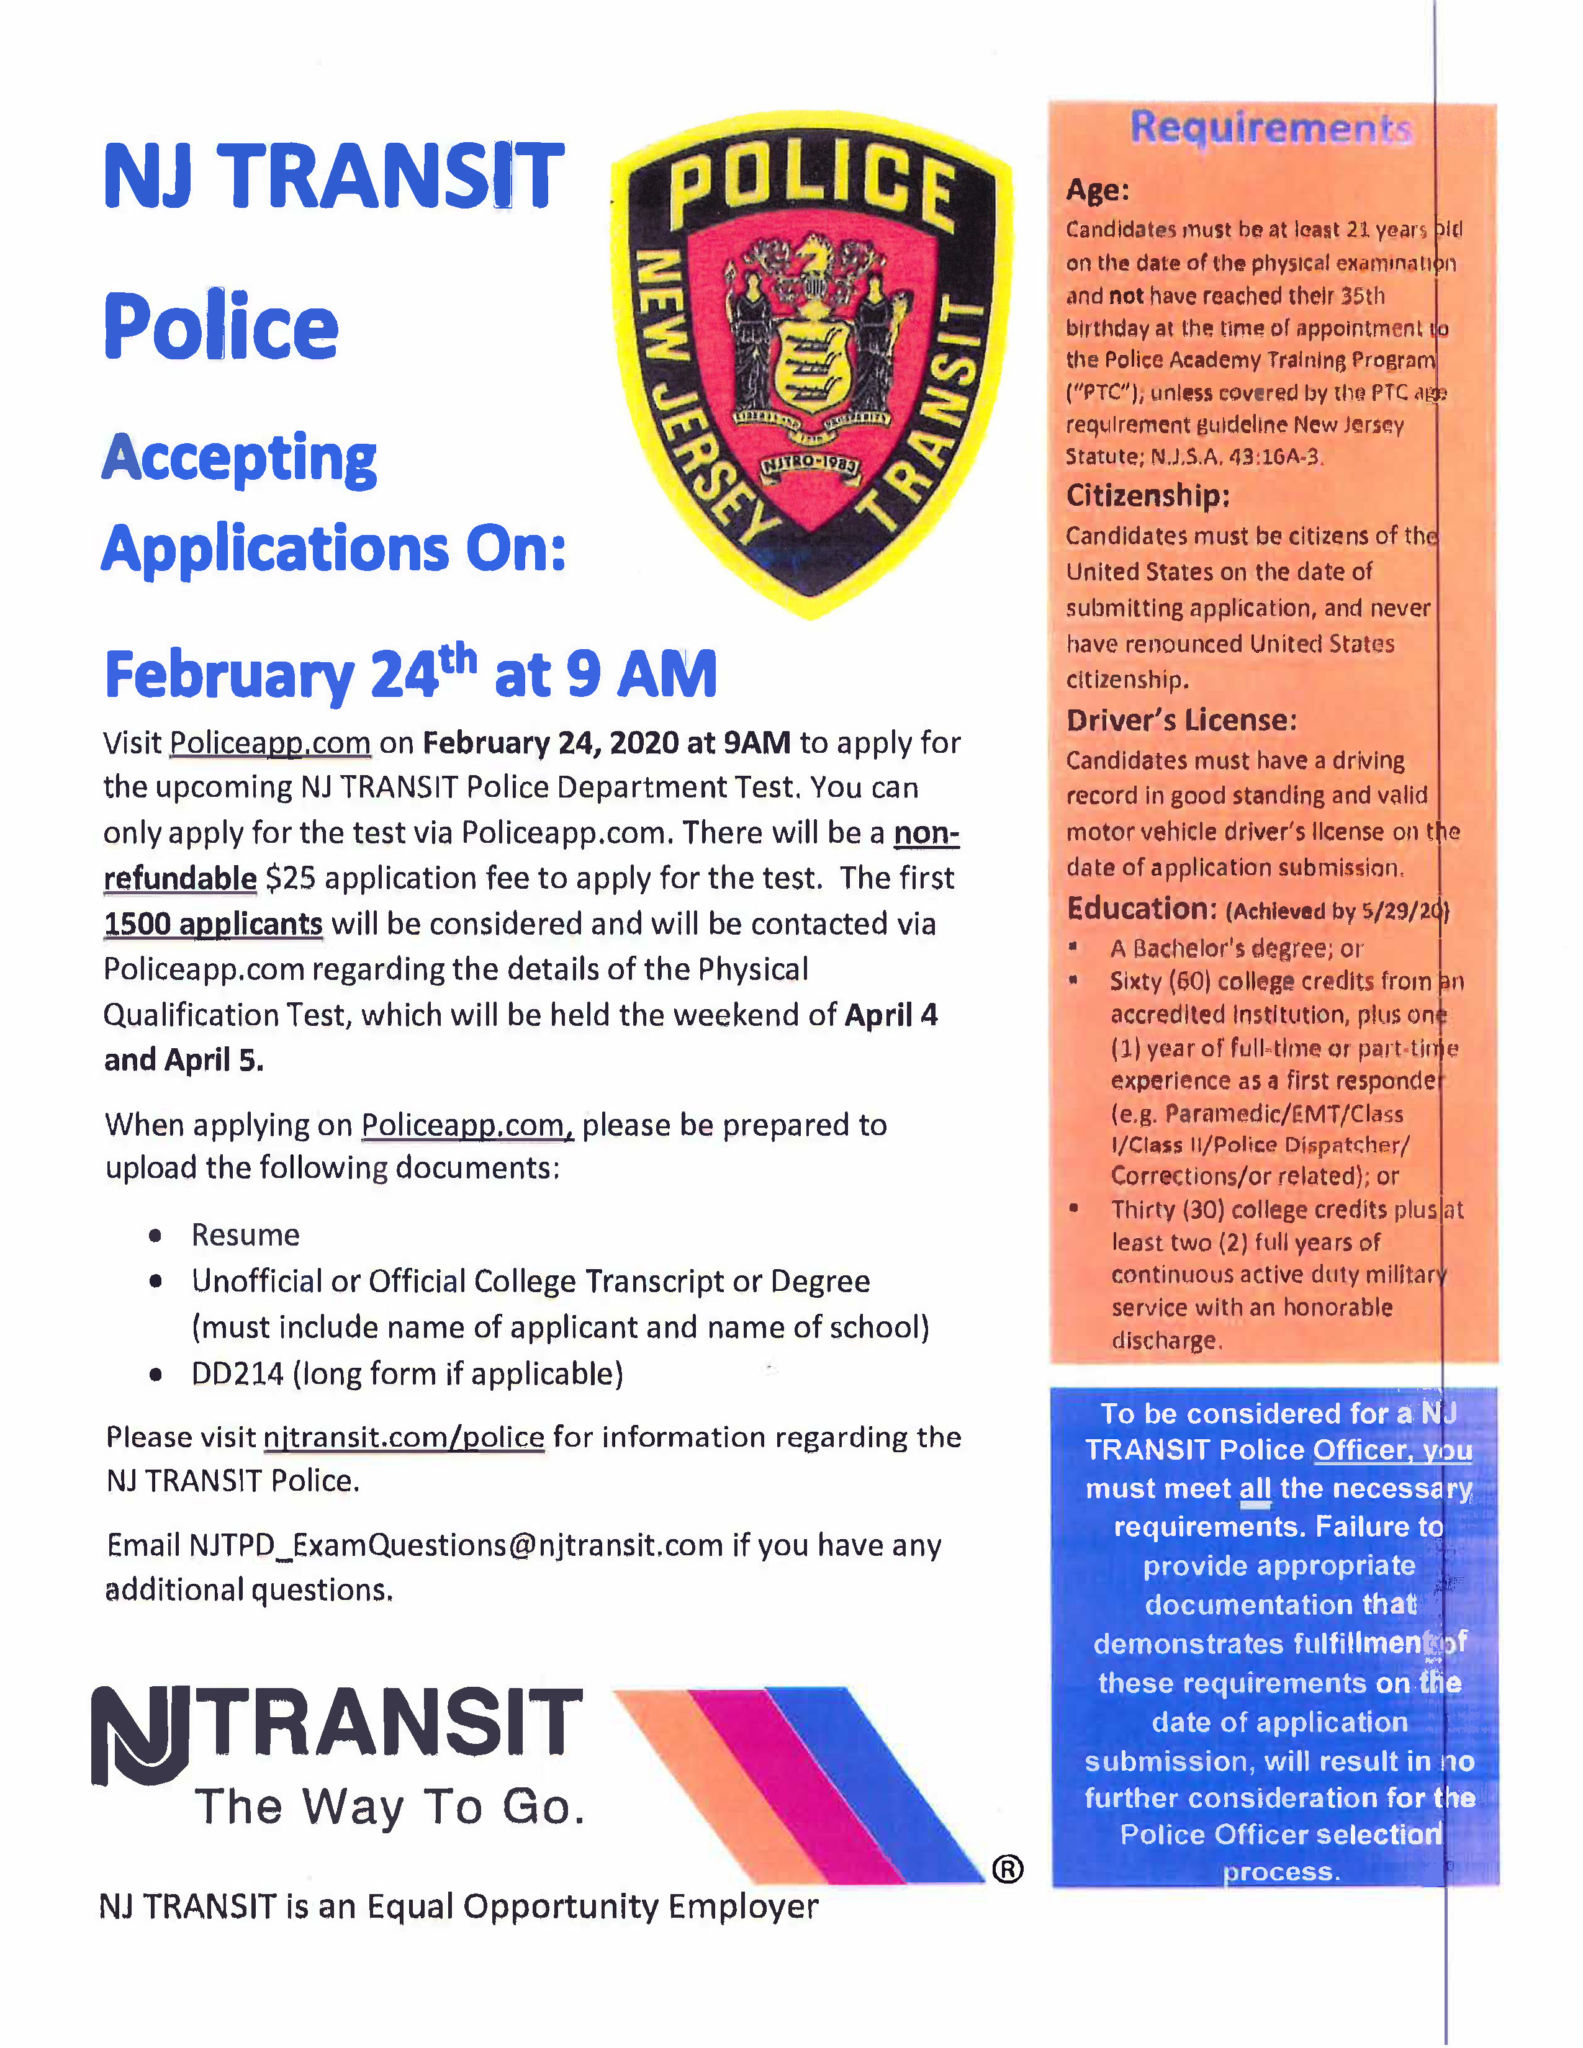 nj-transit-police-accepting-applications-on-mon-feb-24th-bergen-county-new-jersey-american